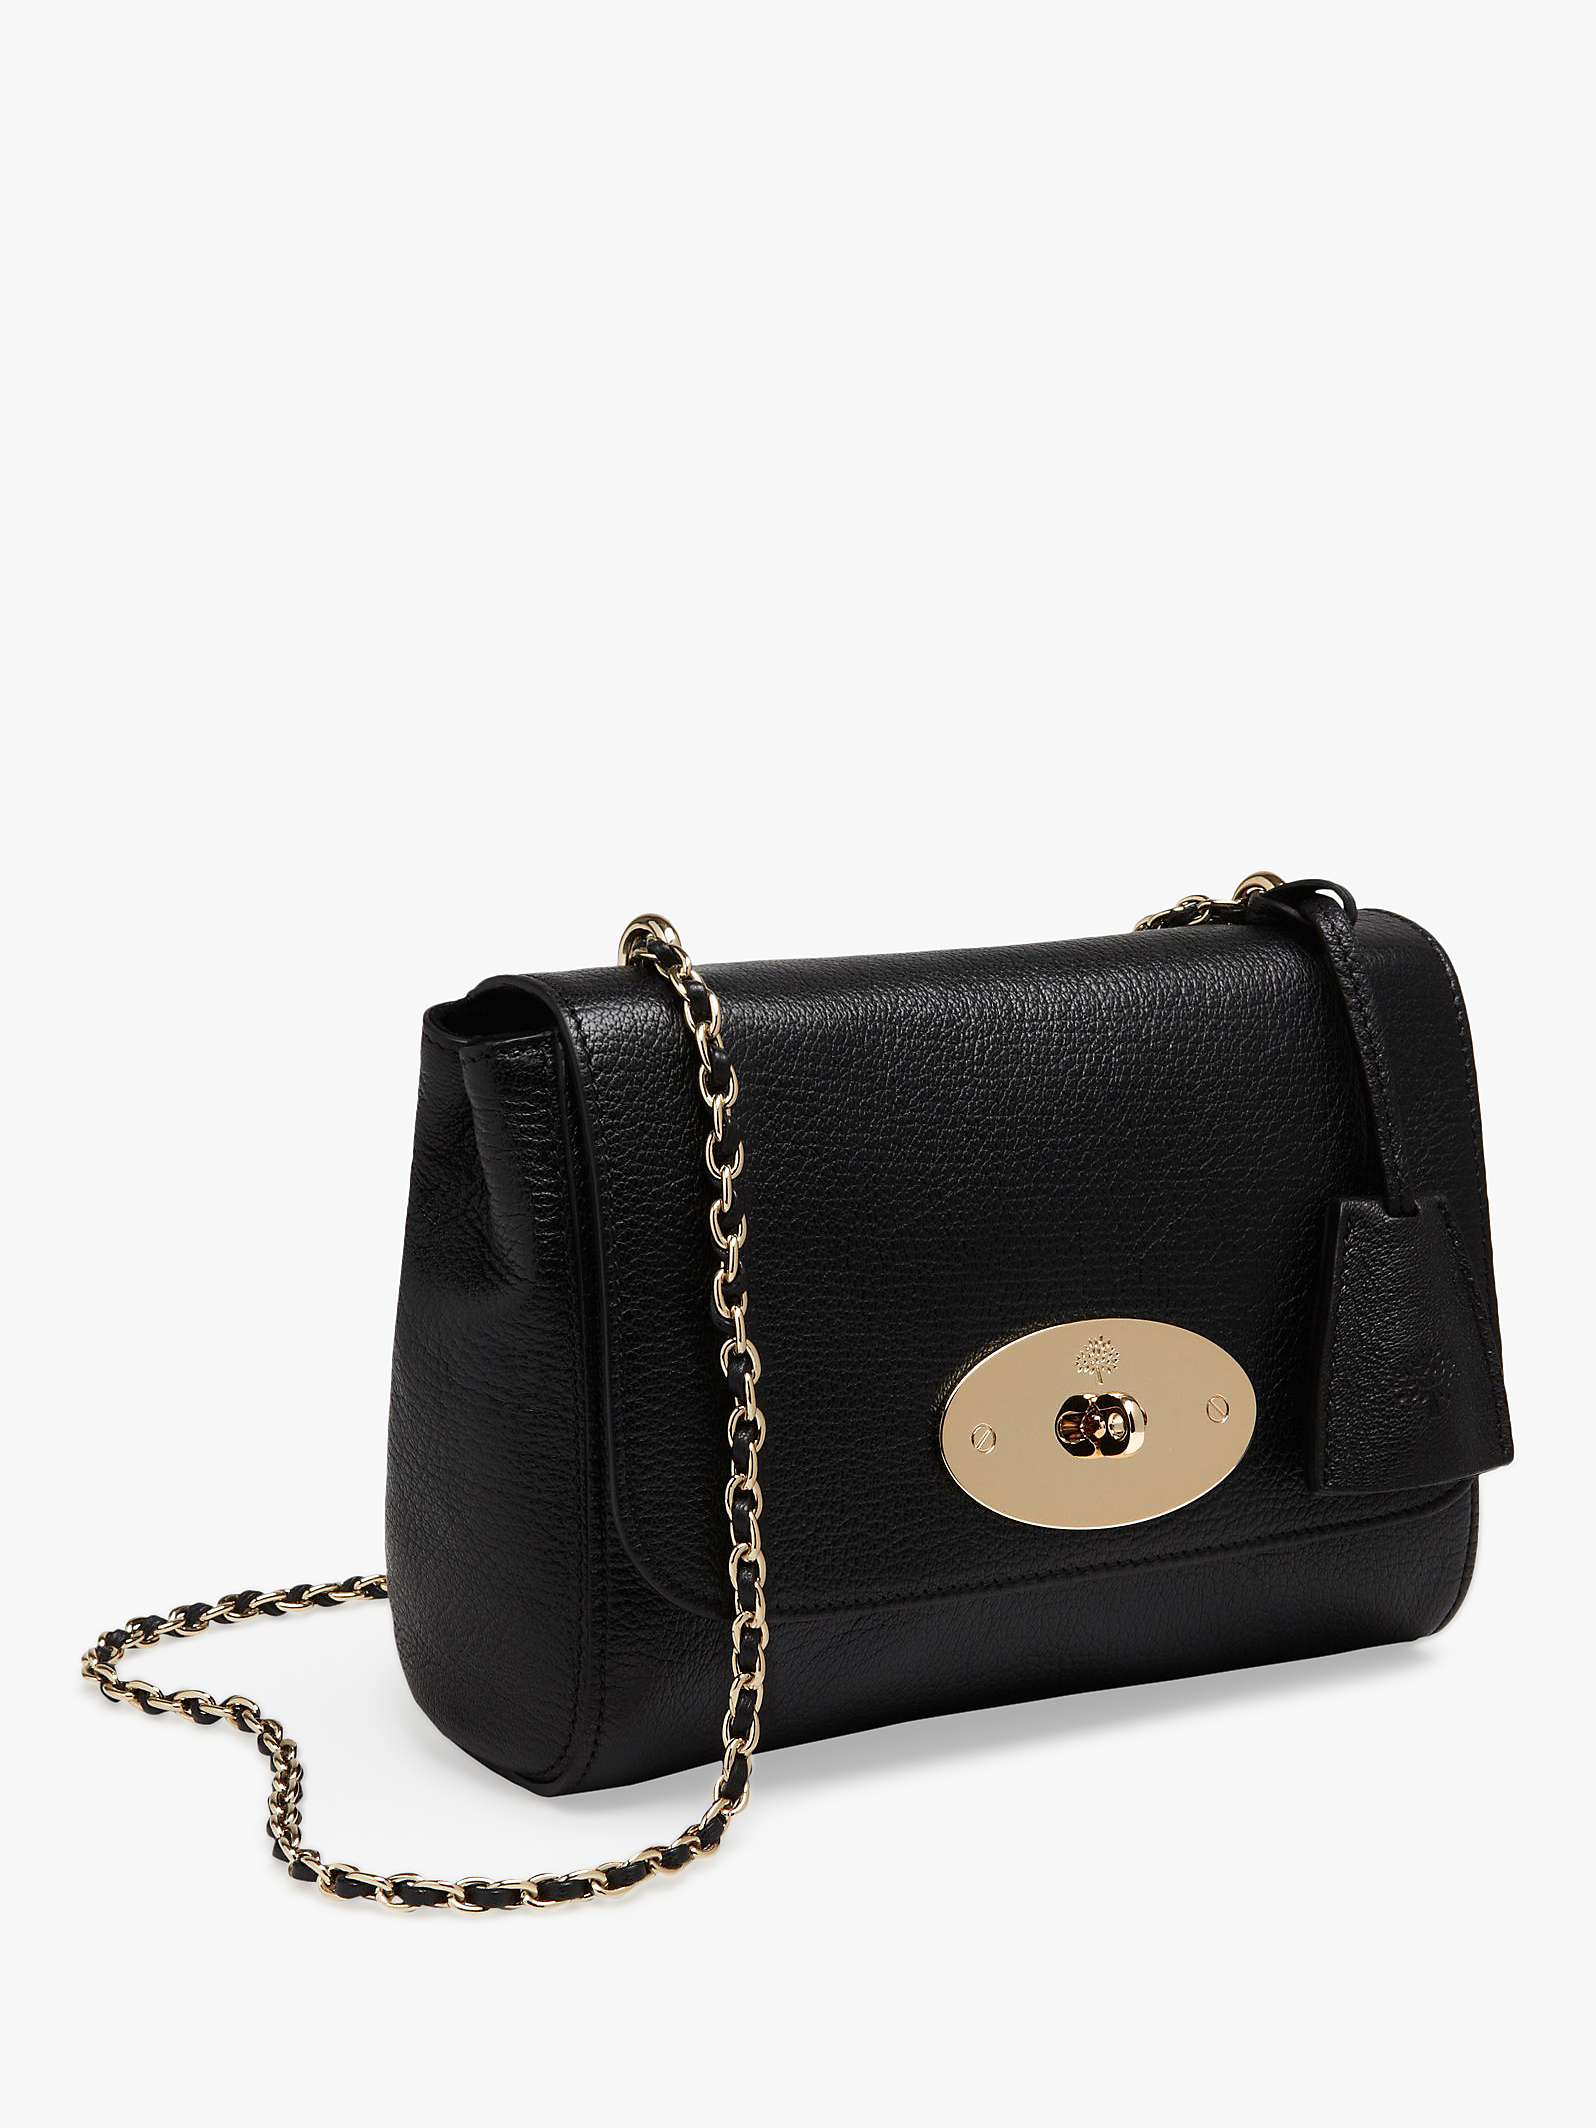 Buy Mulberry Lily Glossy Goat Leather Shoulder Bag Online at johnlewis.com